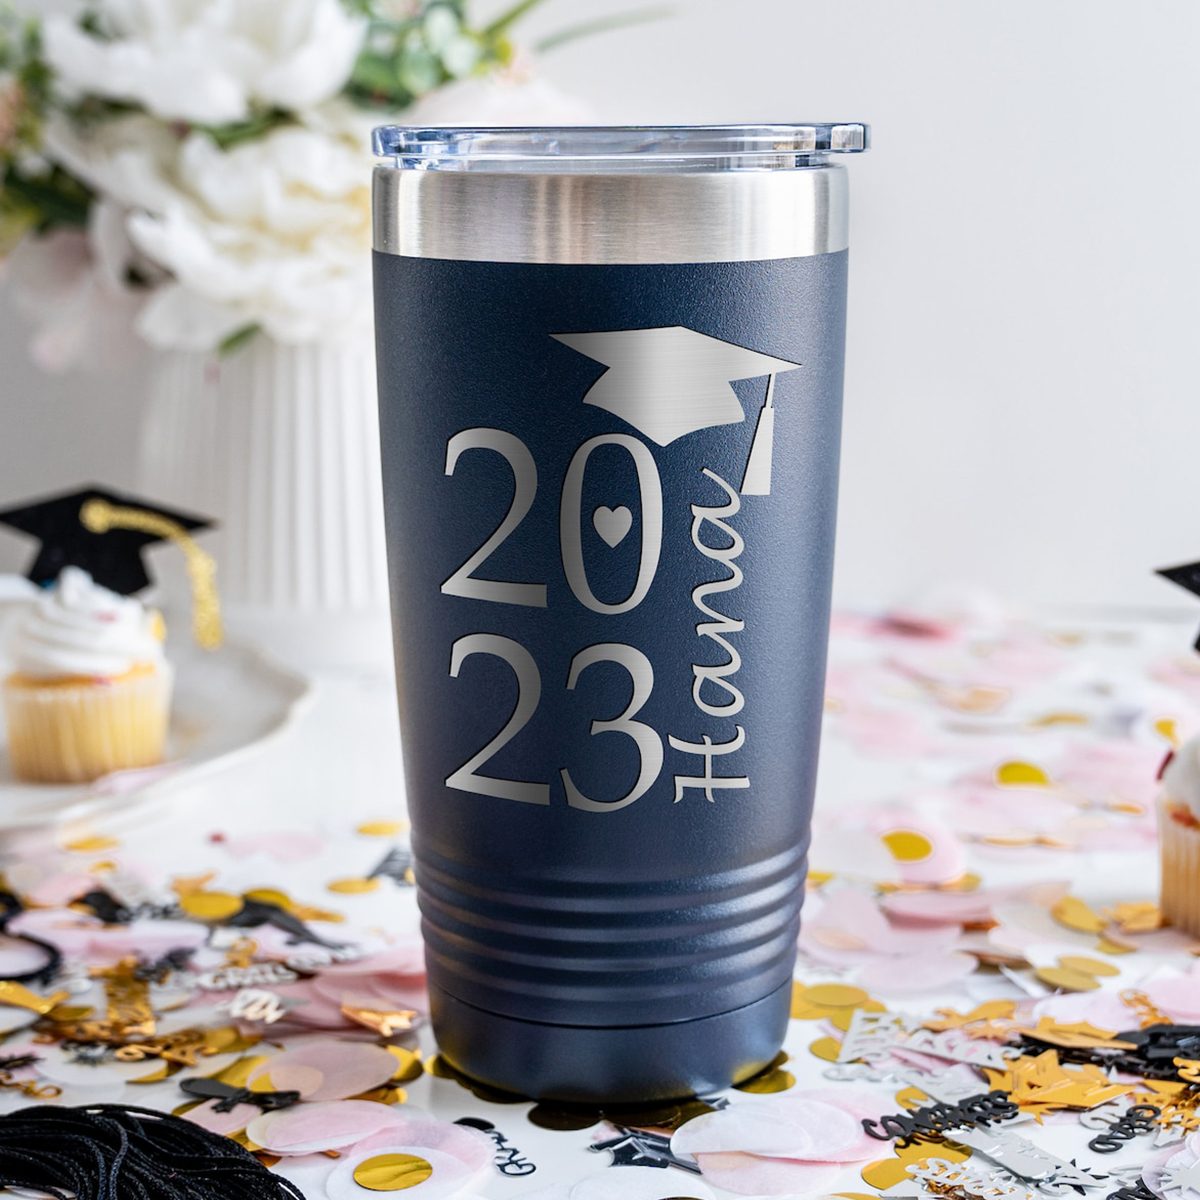 Personalized Graduate Gifts They Will Treasure